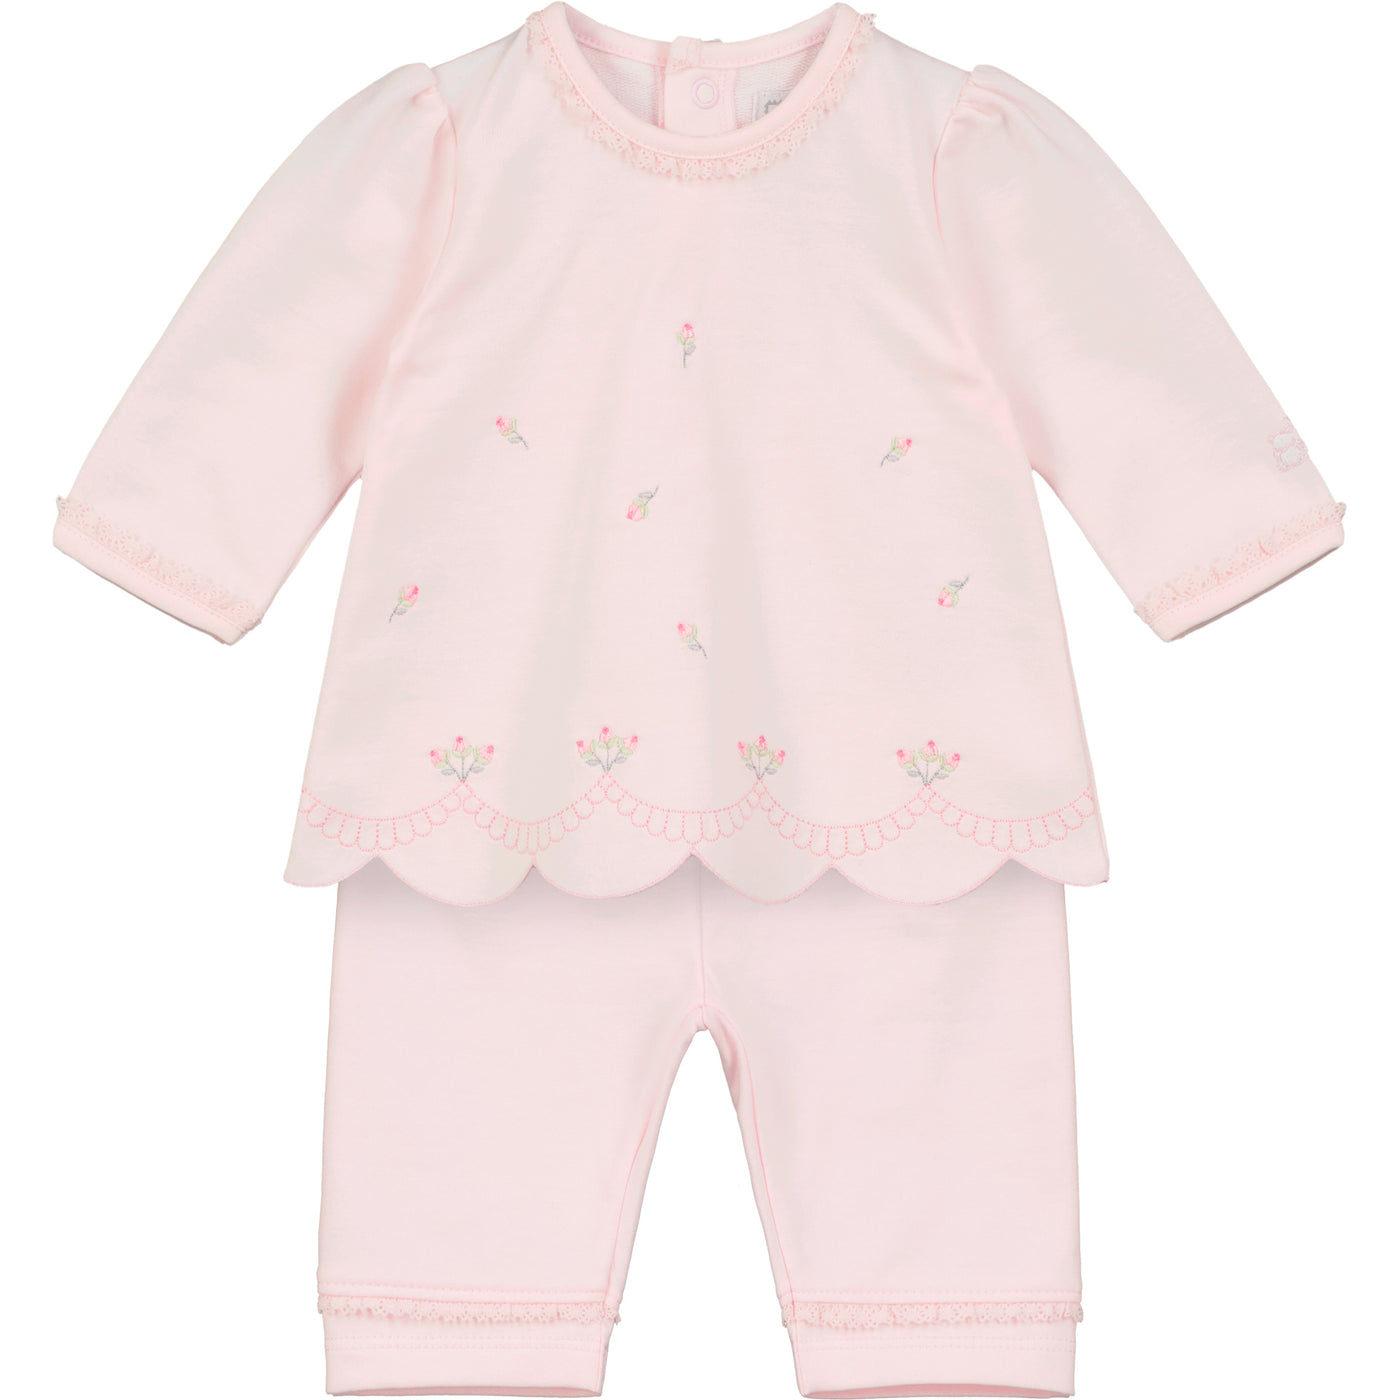 Emma Girls Pretty Top & Trousers Outfit